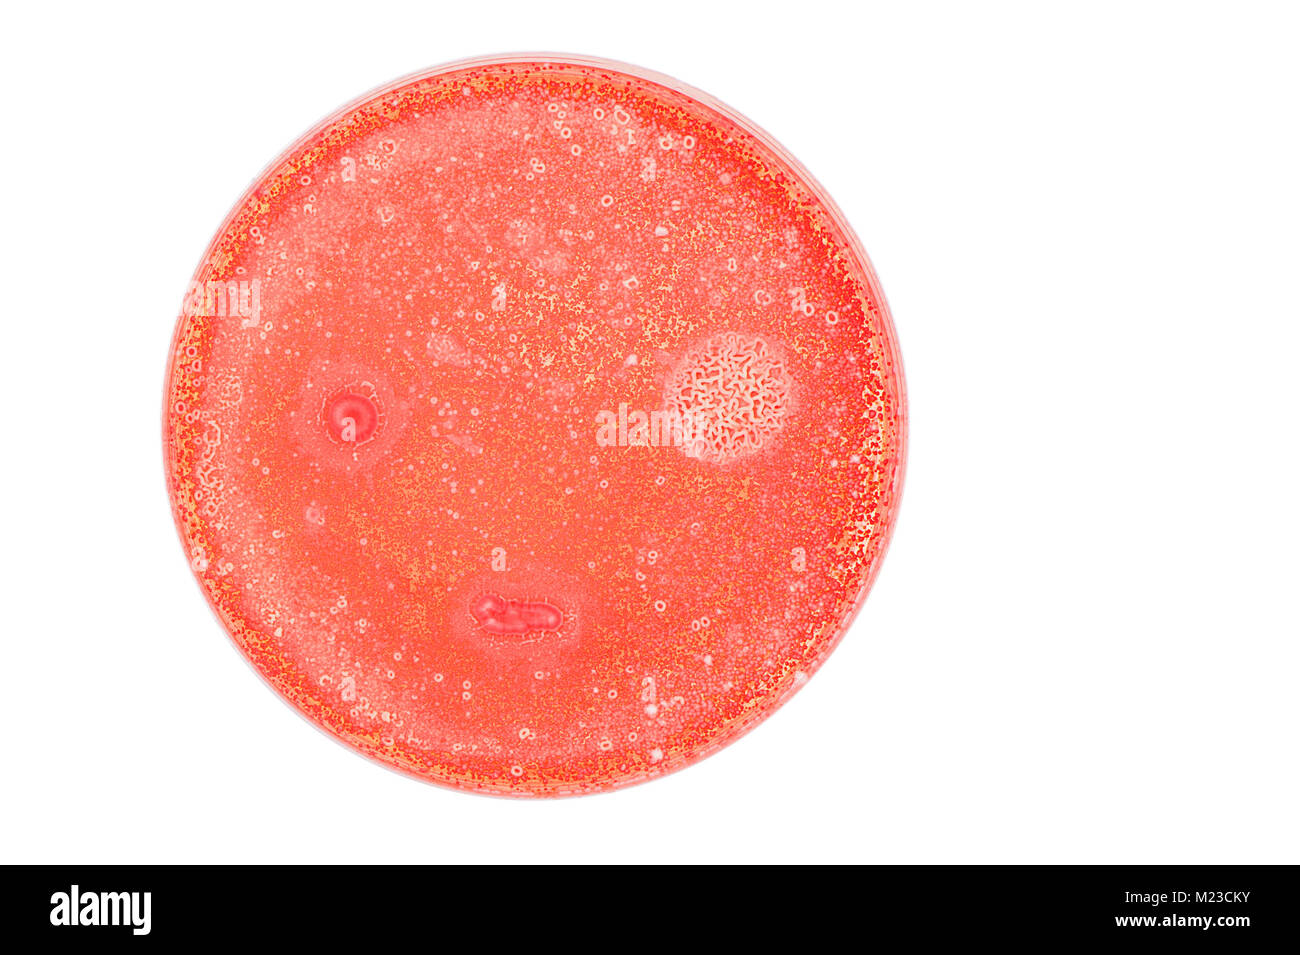 Petri dish with bacteria and yeast colonies growing, isolated on a white background. Stock Photo